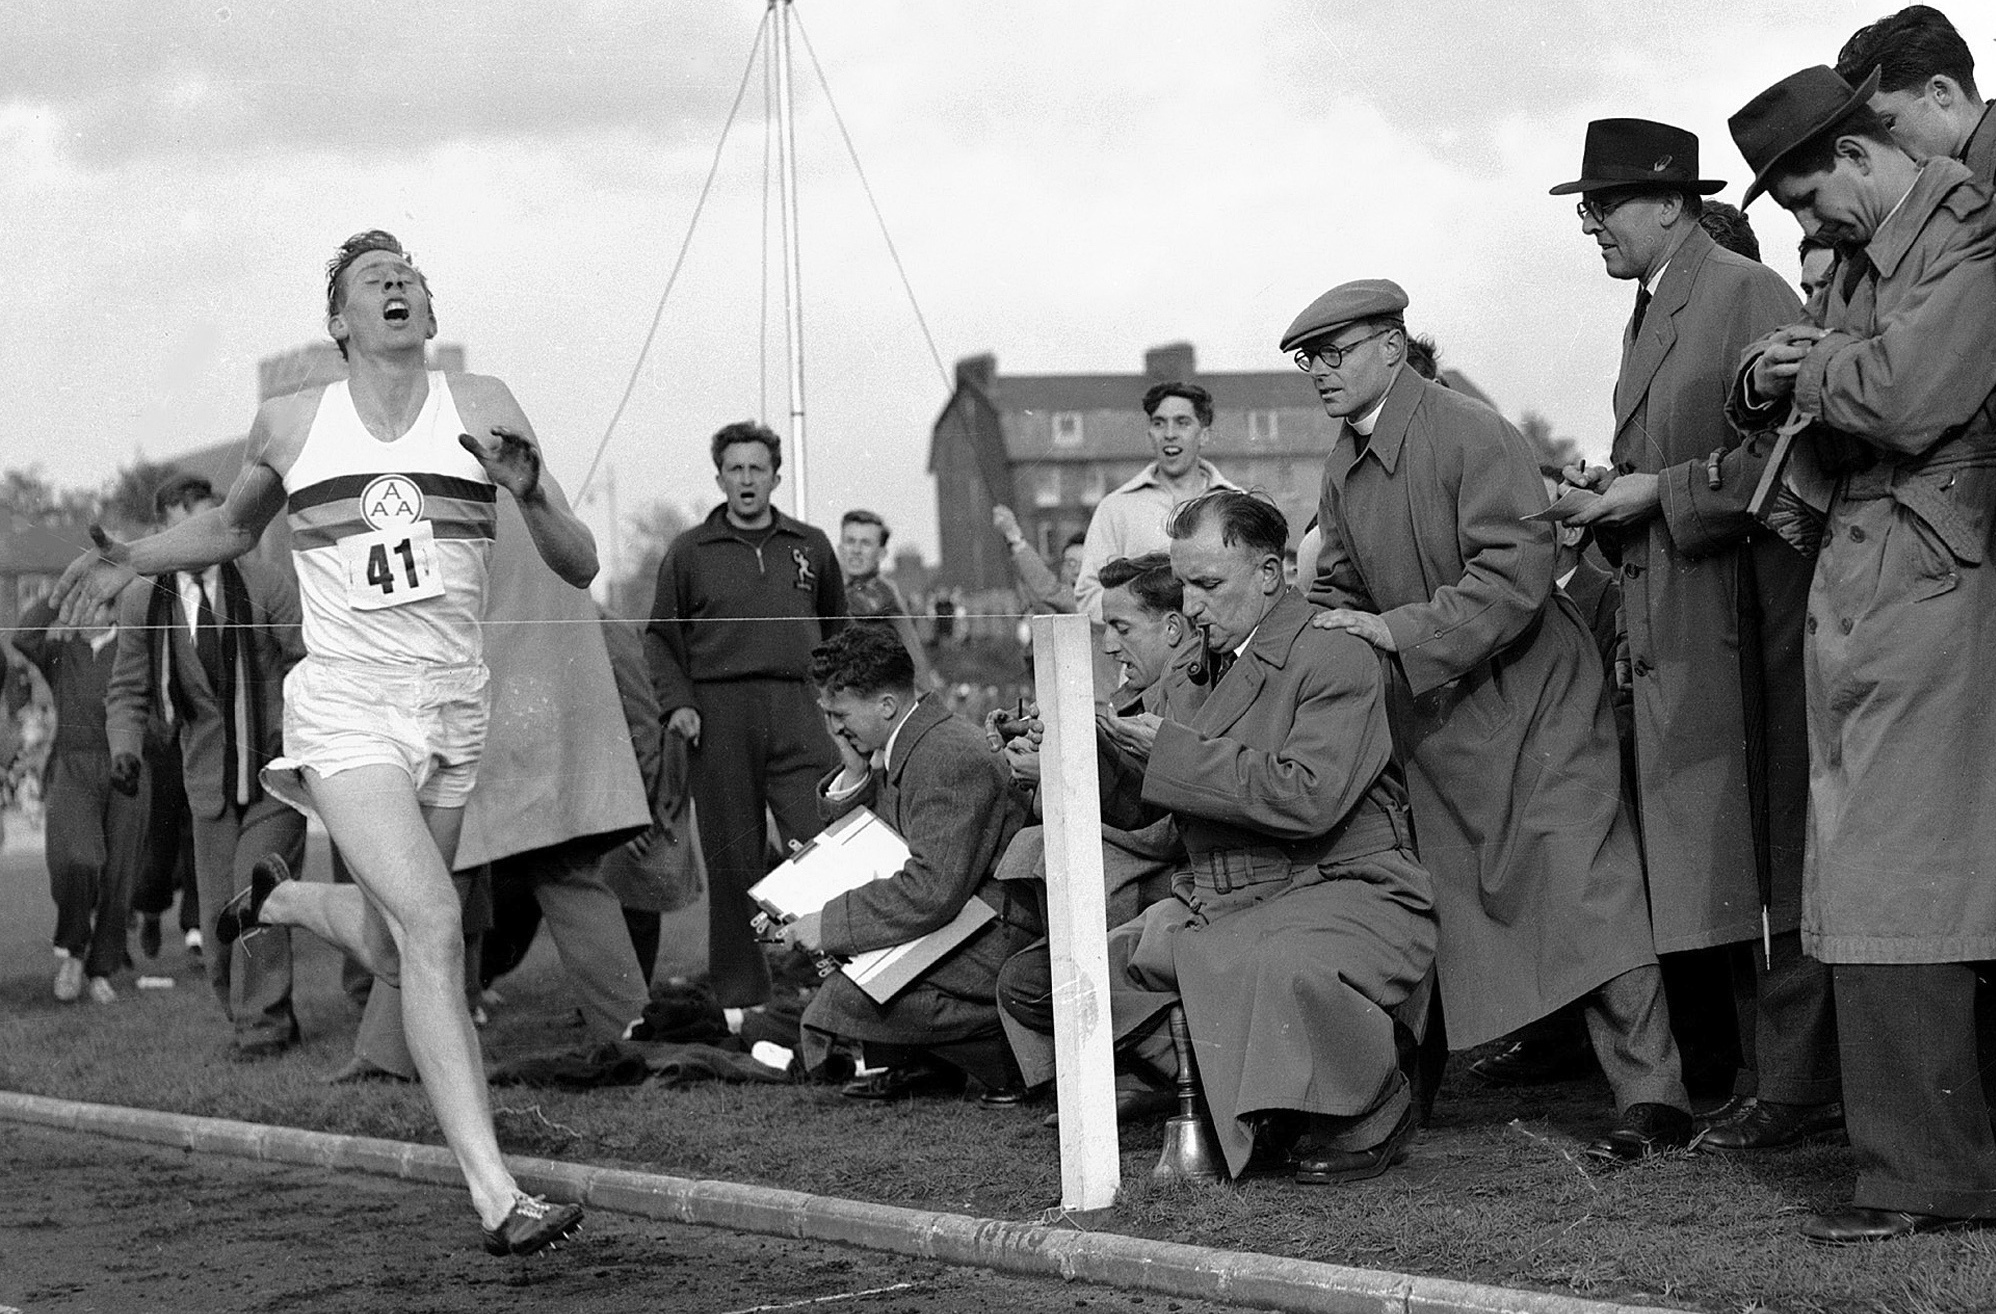 1954 Roger Bannister becomes the first person to run a mile in under 4 minutes